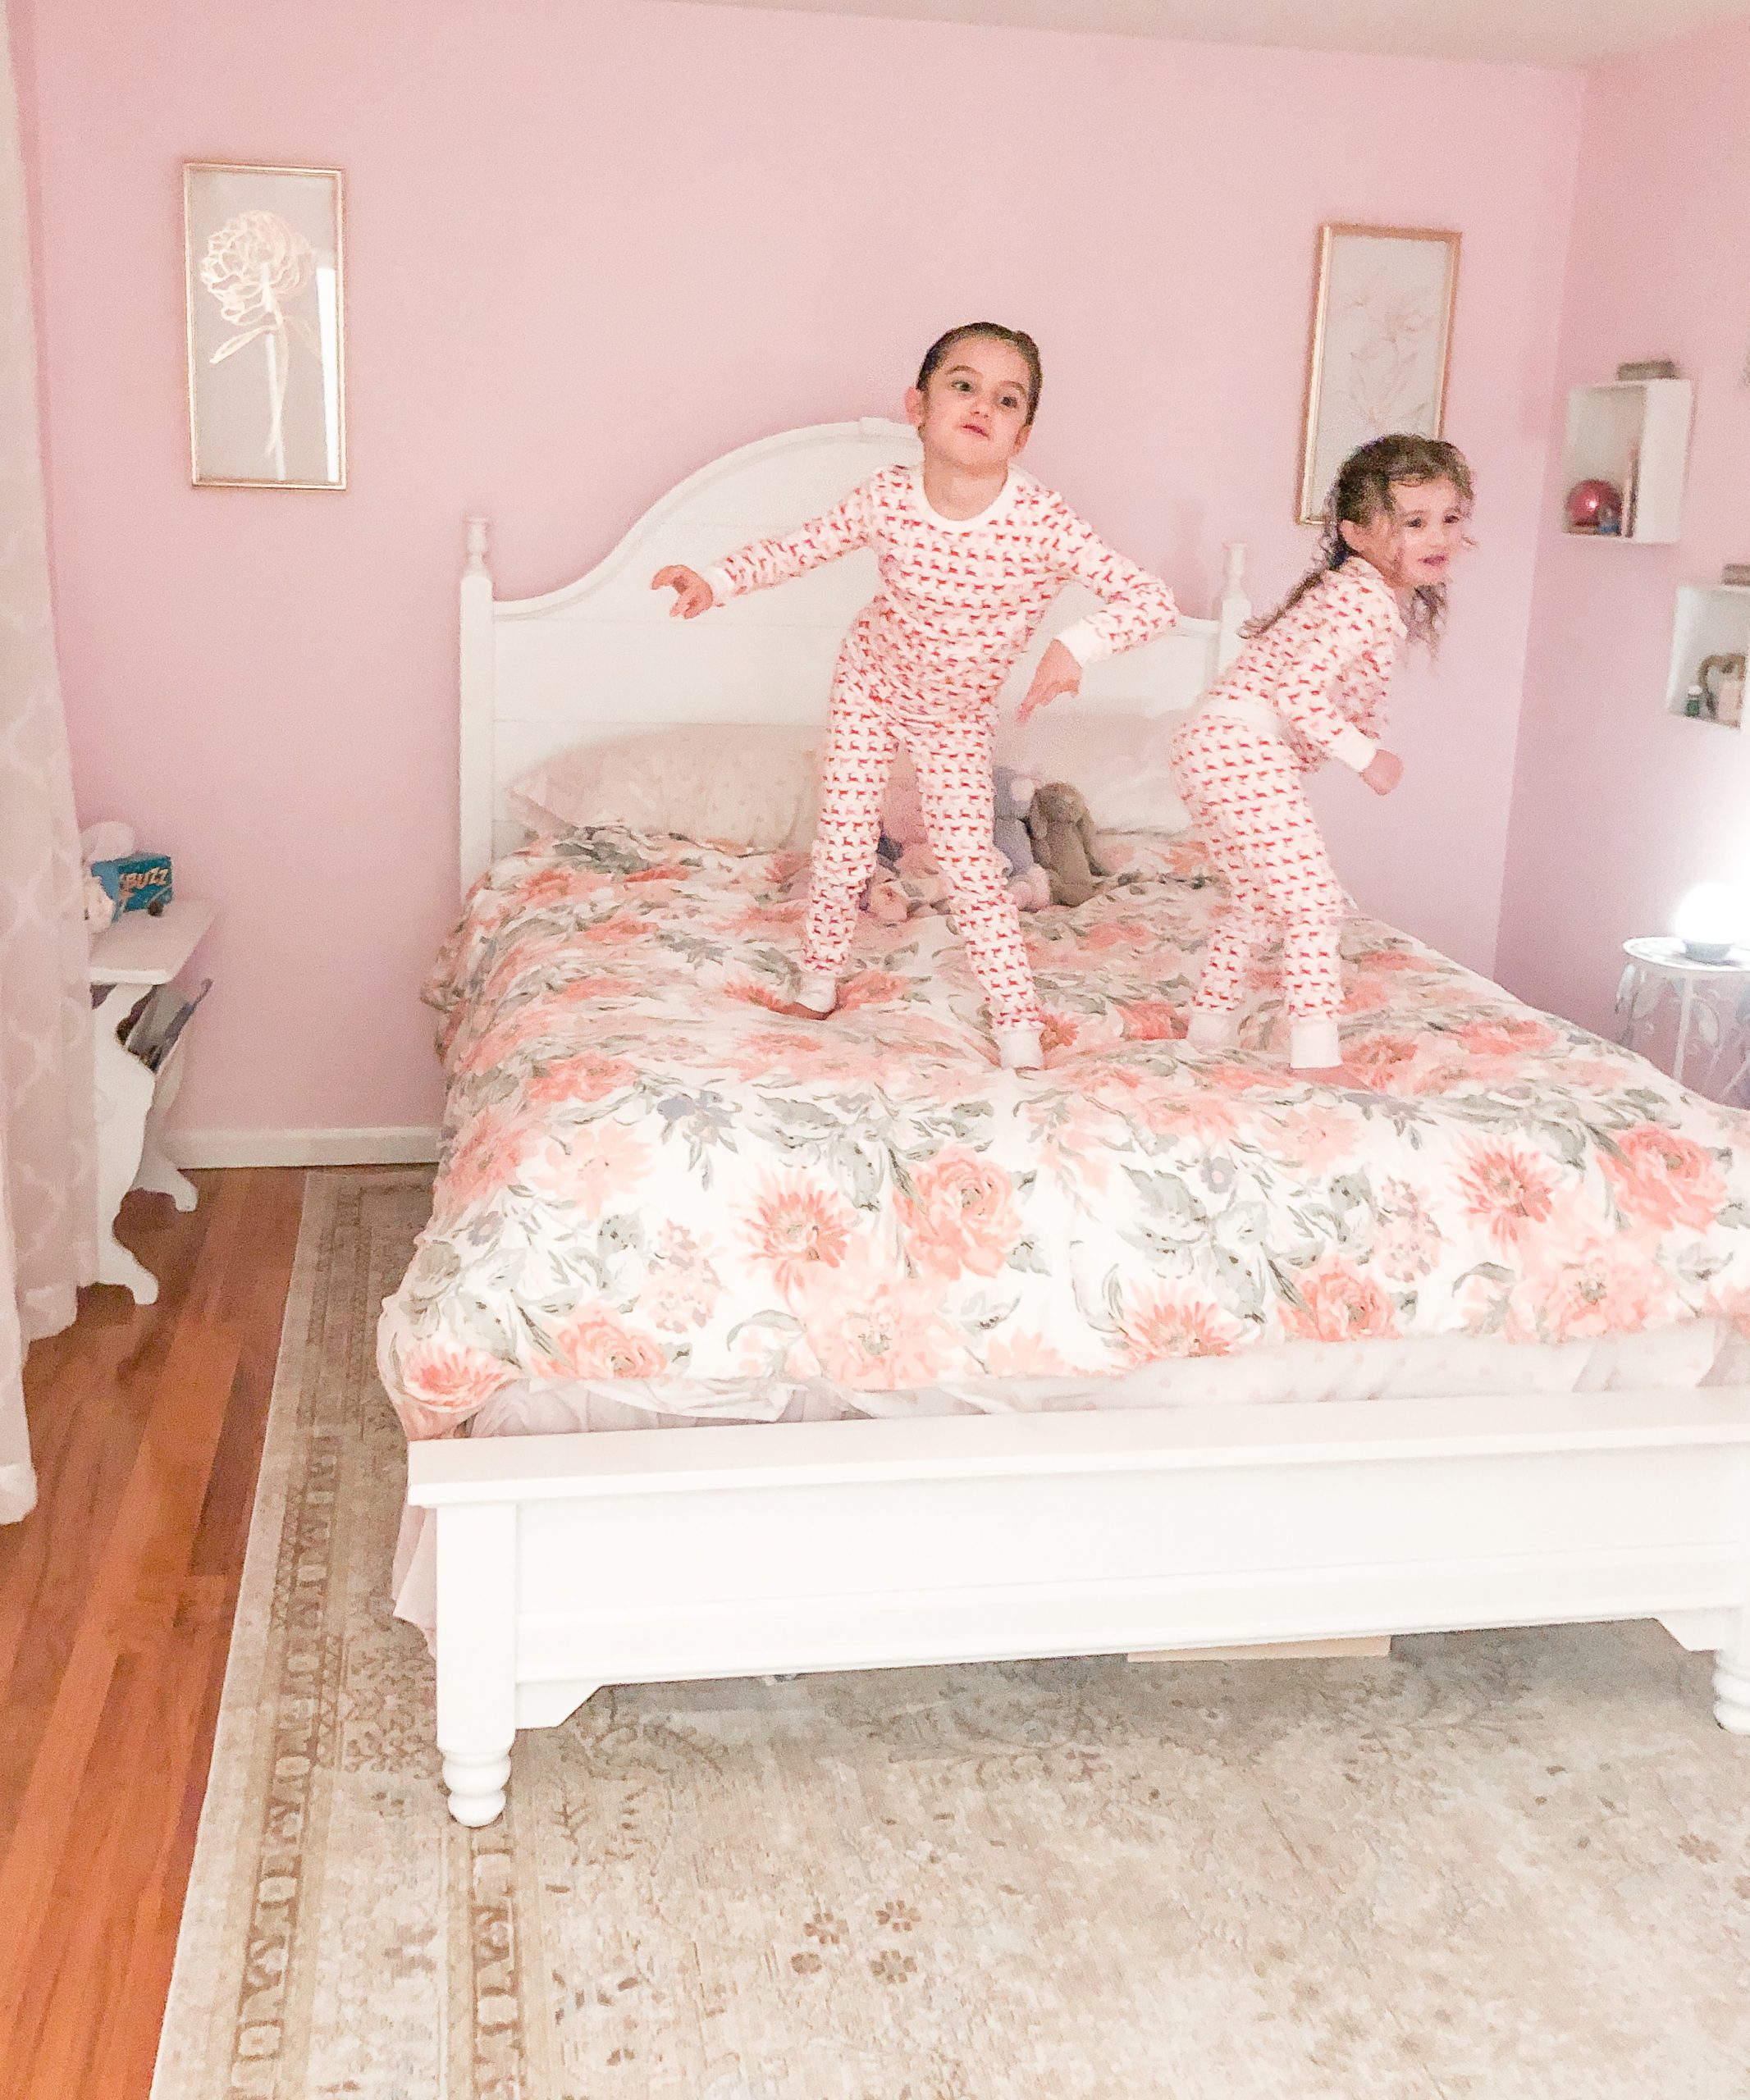 little girls jumping on bed in pink bedroom walls, white bed with floral bedding, white sheer curtains